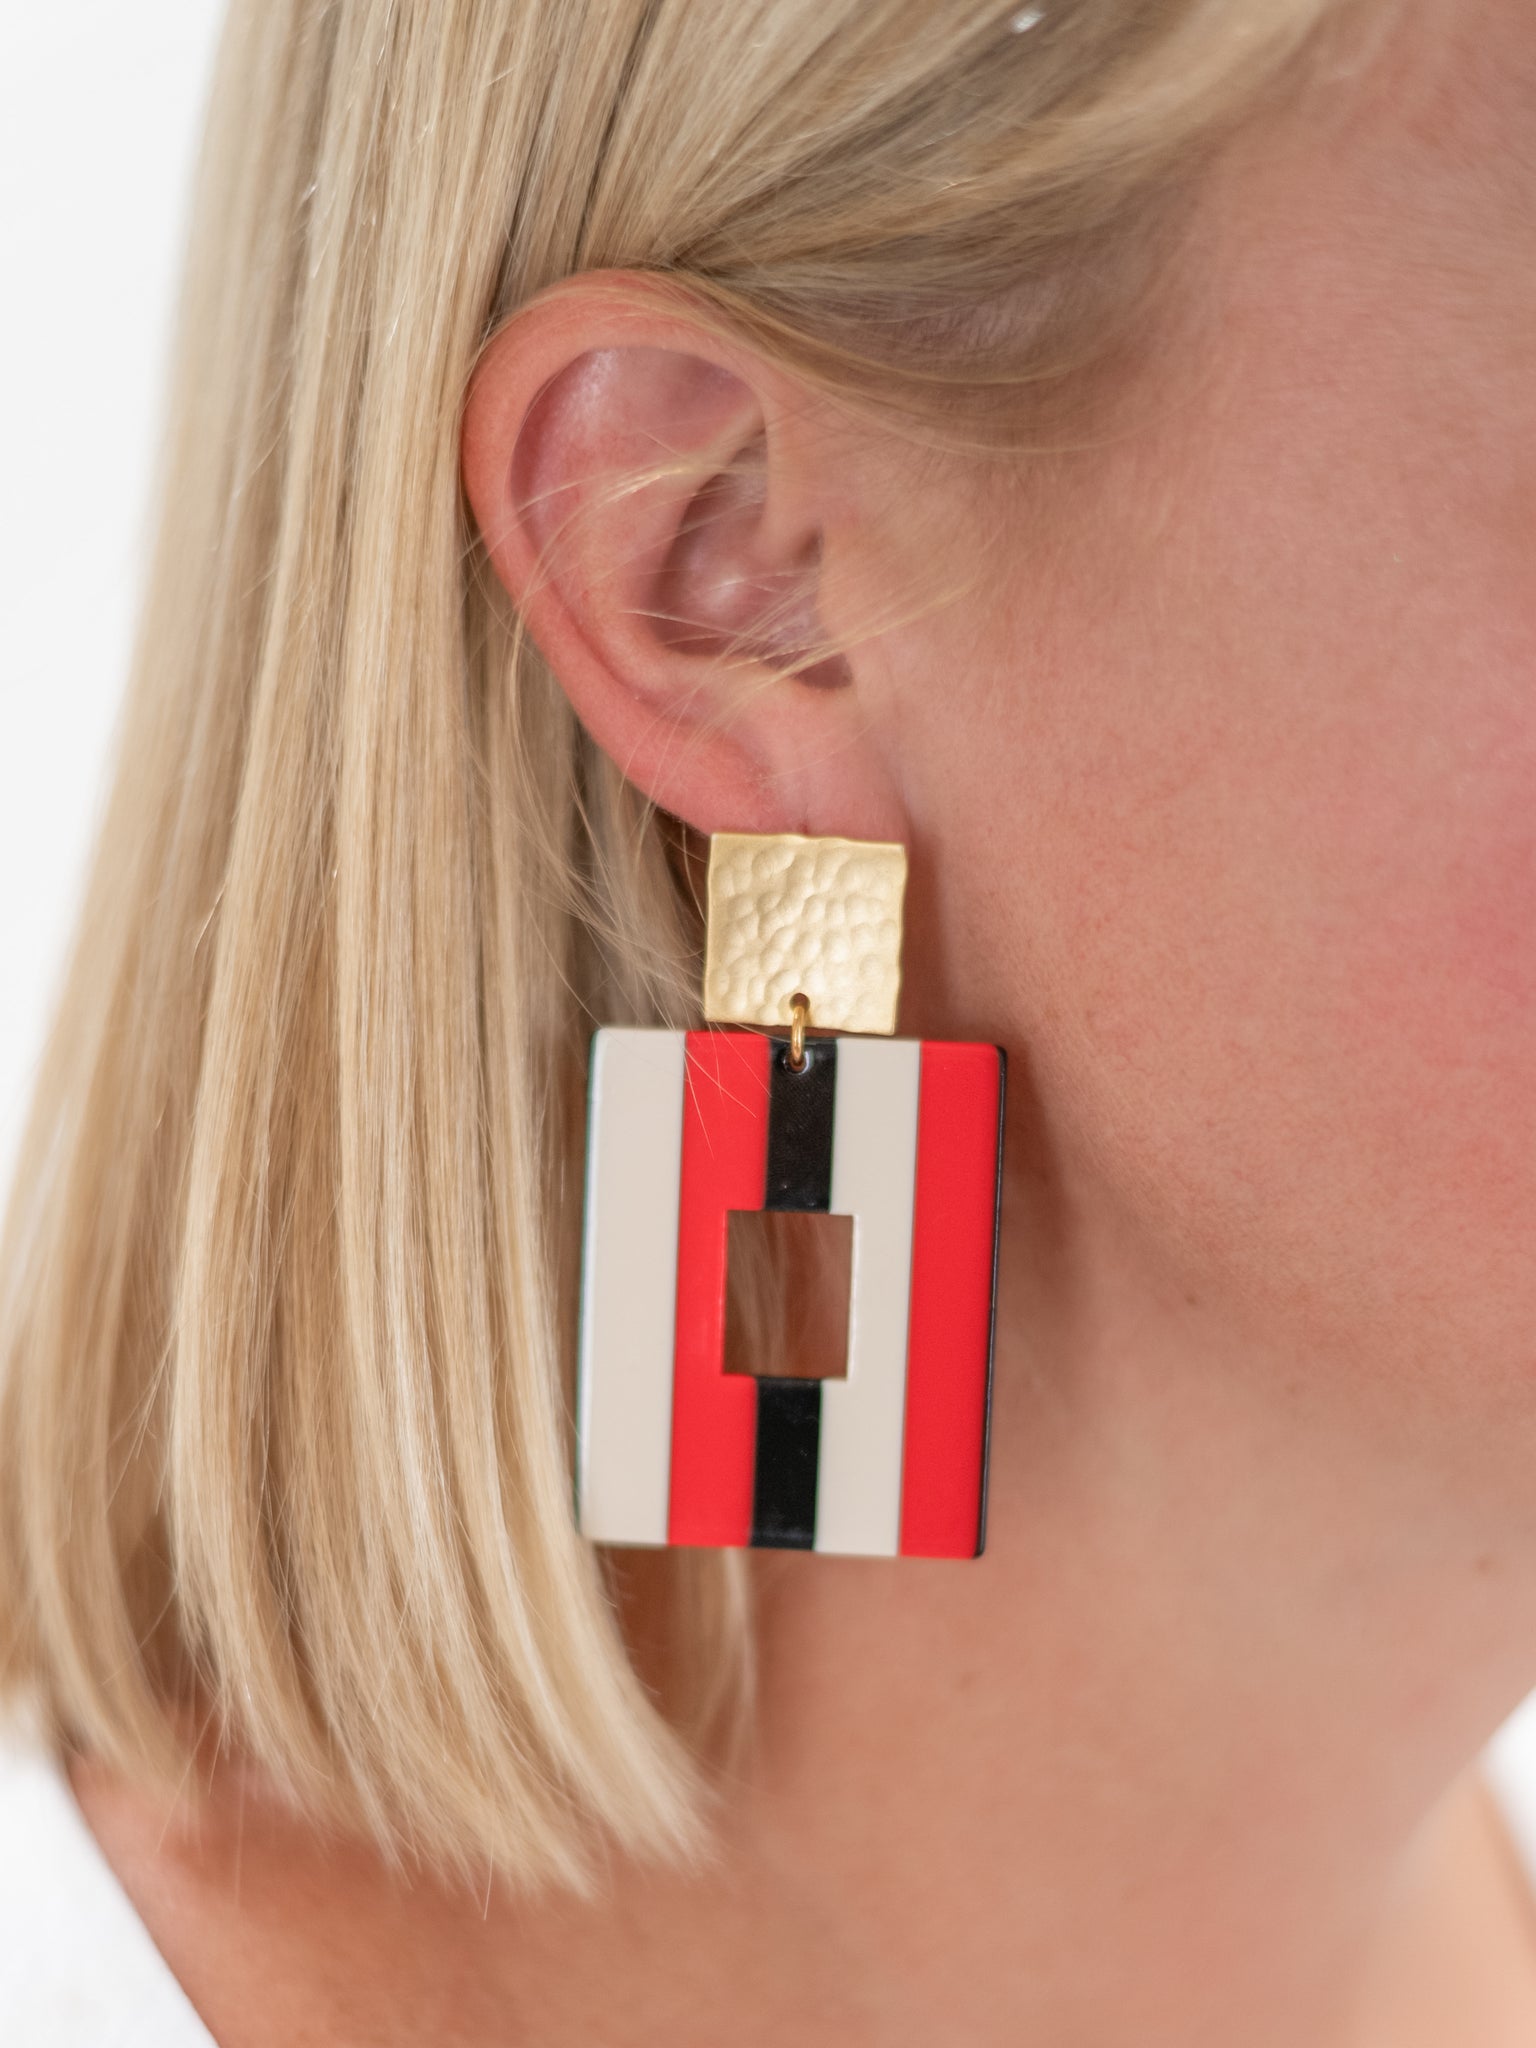 Game Day Acrylic Earrings by Virture